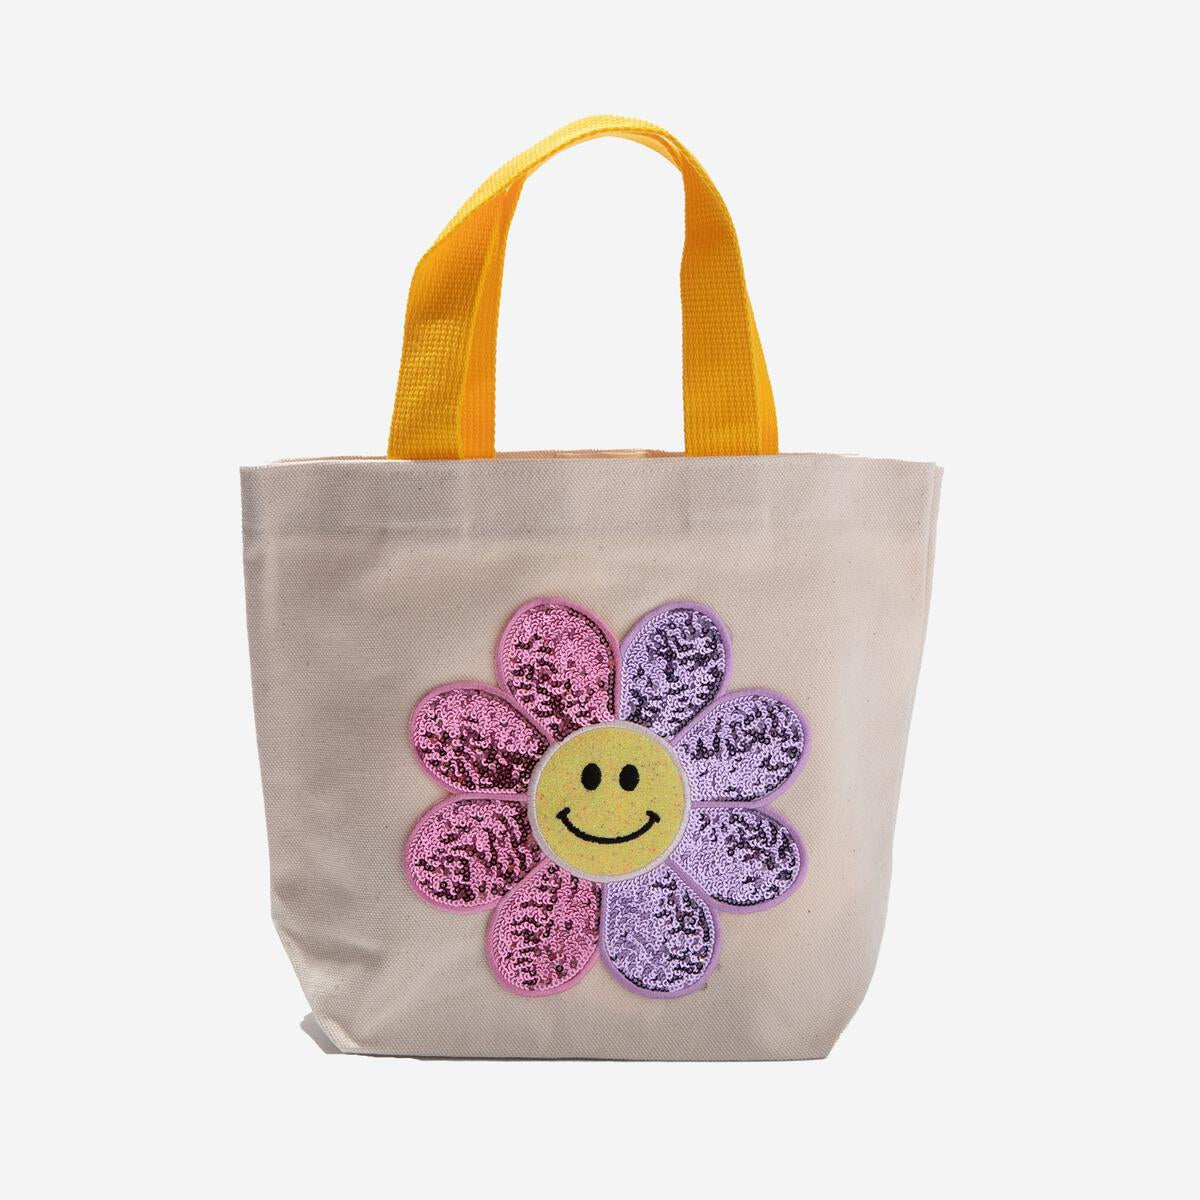 PINK DAISY PATCH TOTE